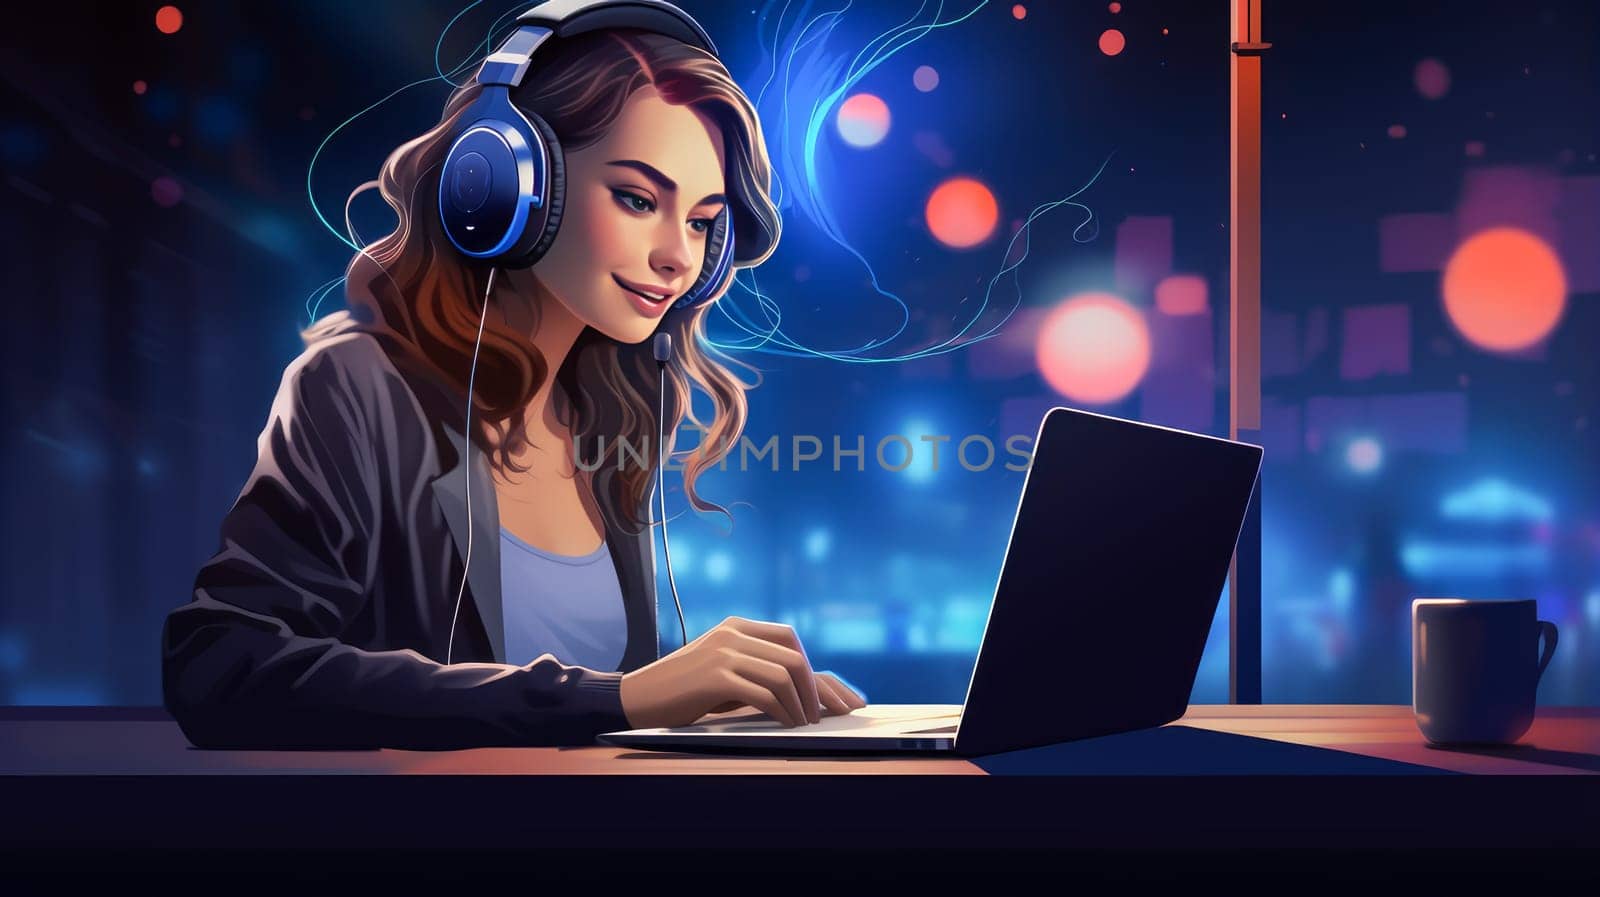 Portrait of a young modern DJ girl wearing headphones and using a laptop against the backdrop of a night city and neon lights in a futuristic style.....